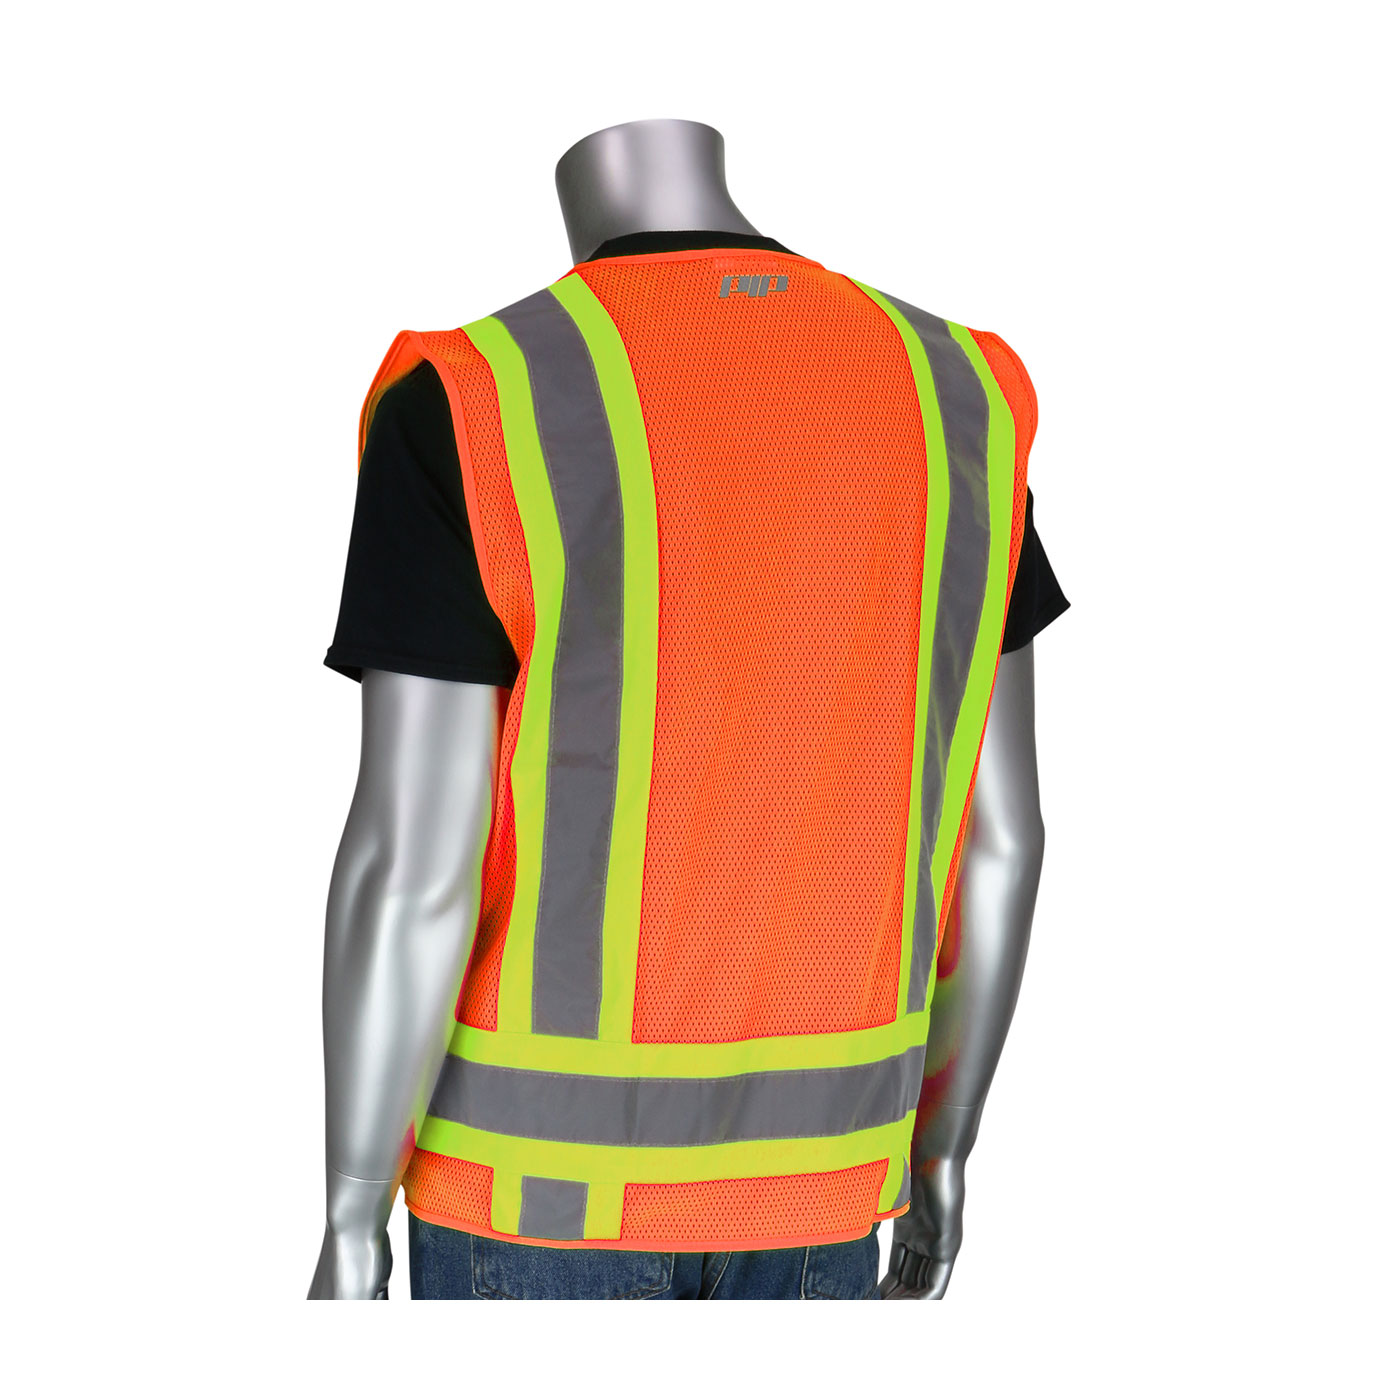 PIP® ANSI Type R Class 2 Two-Tone Eleven Pocket Surveyors Vest with Solid Front and Mesh Back #302-0500-ORG